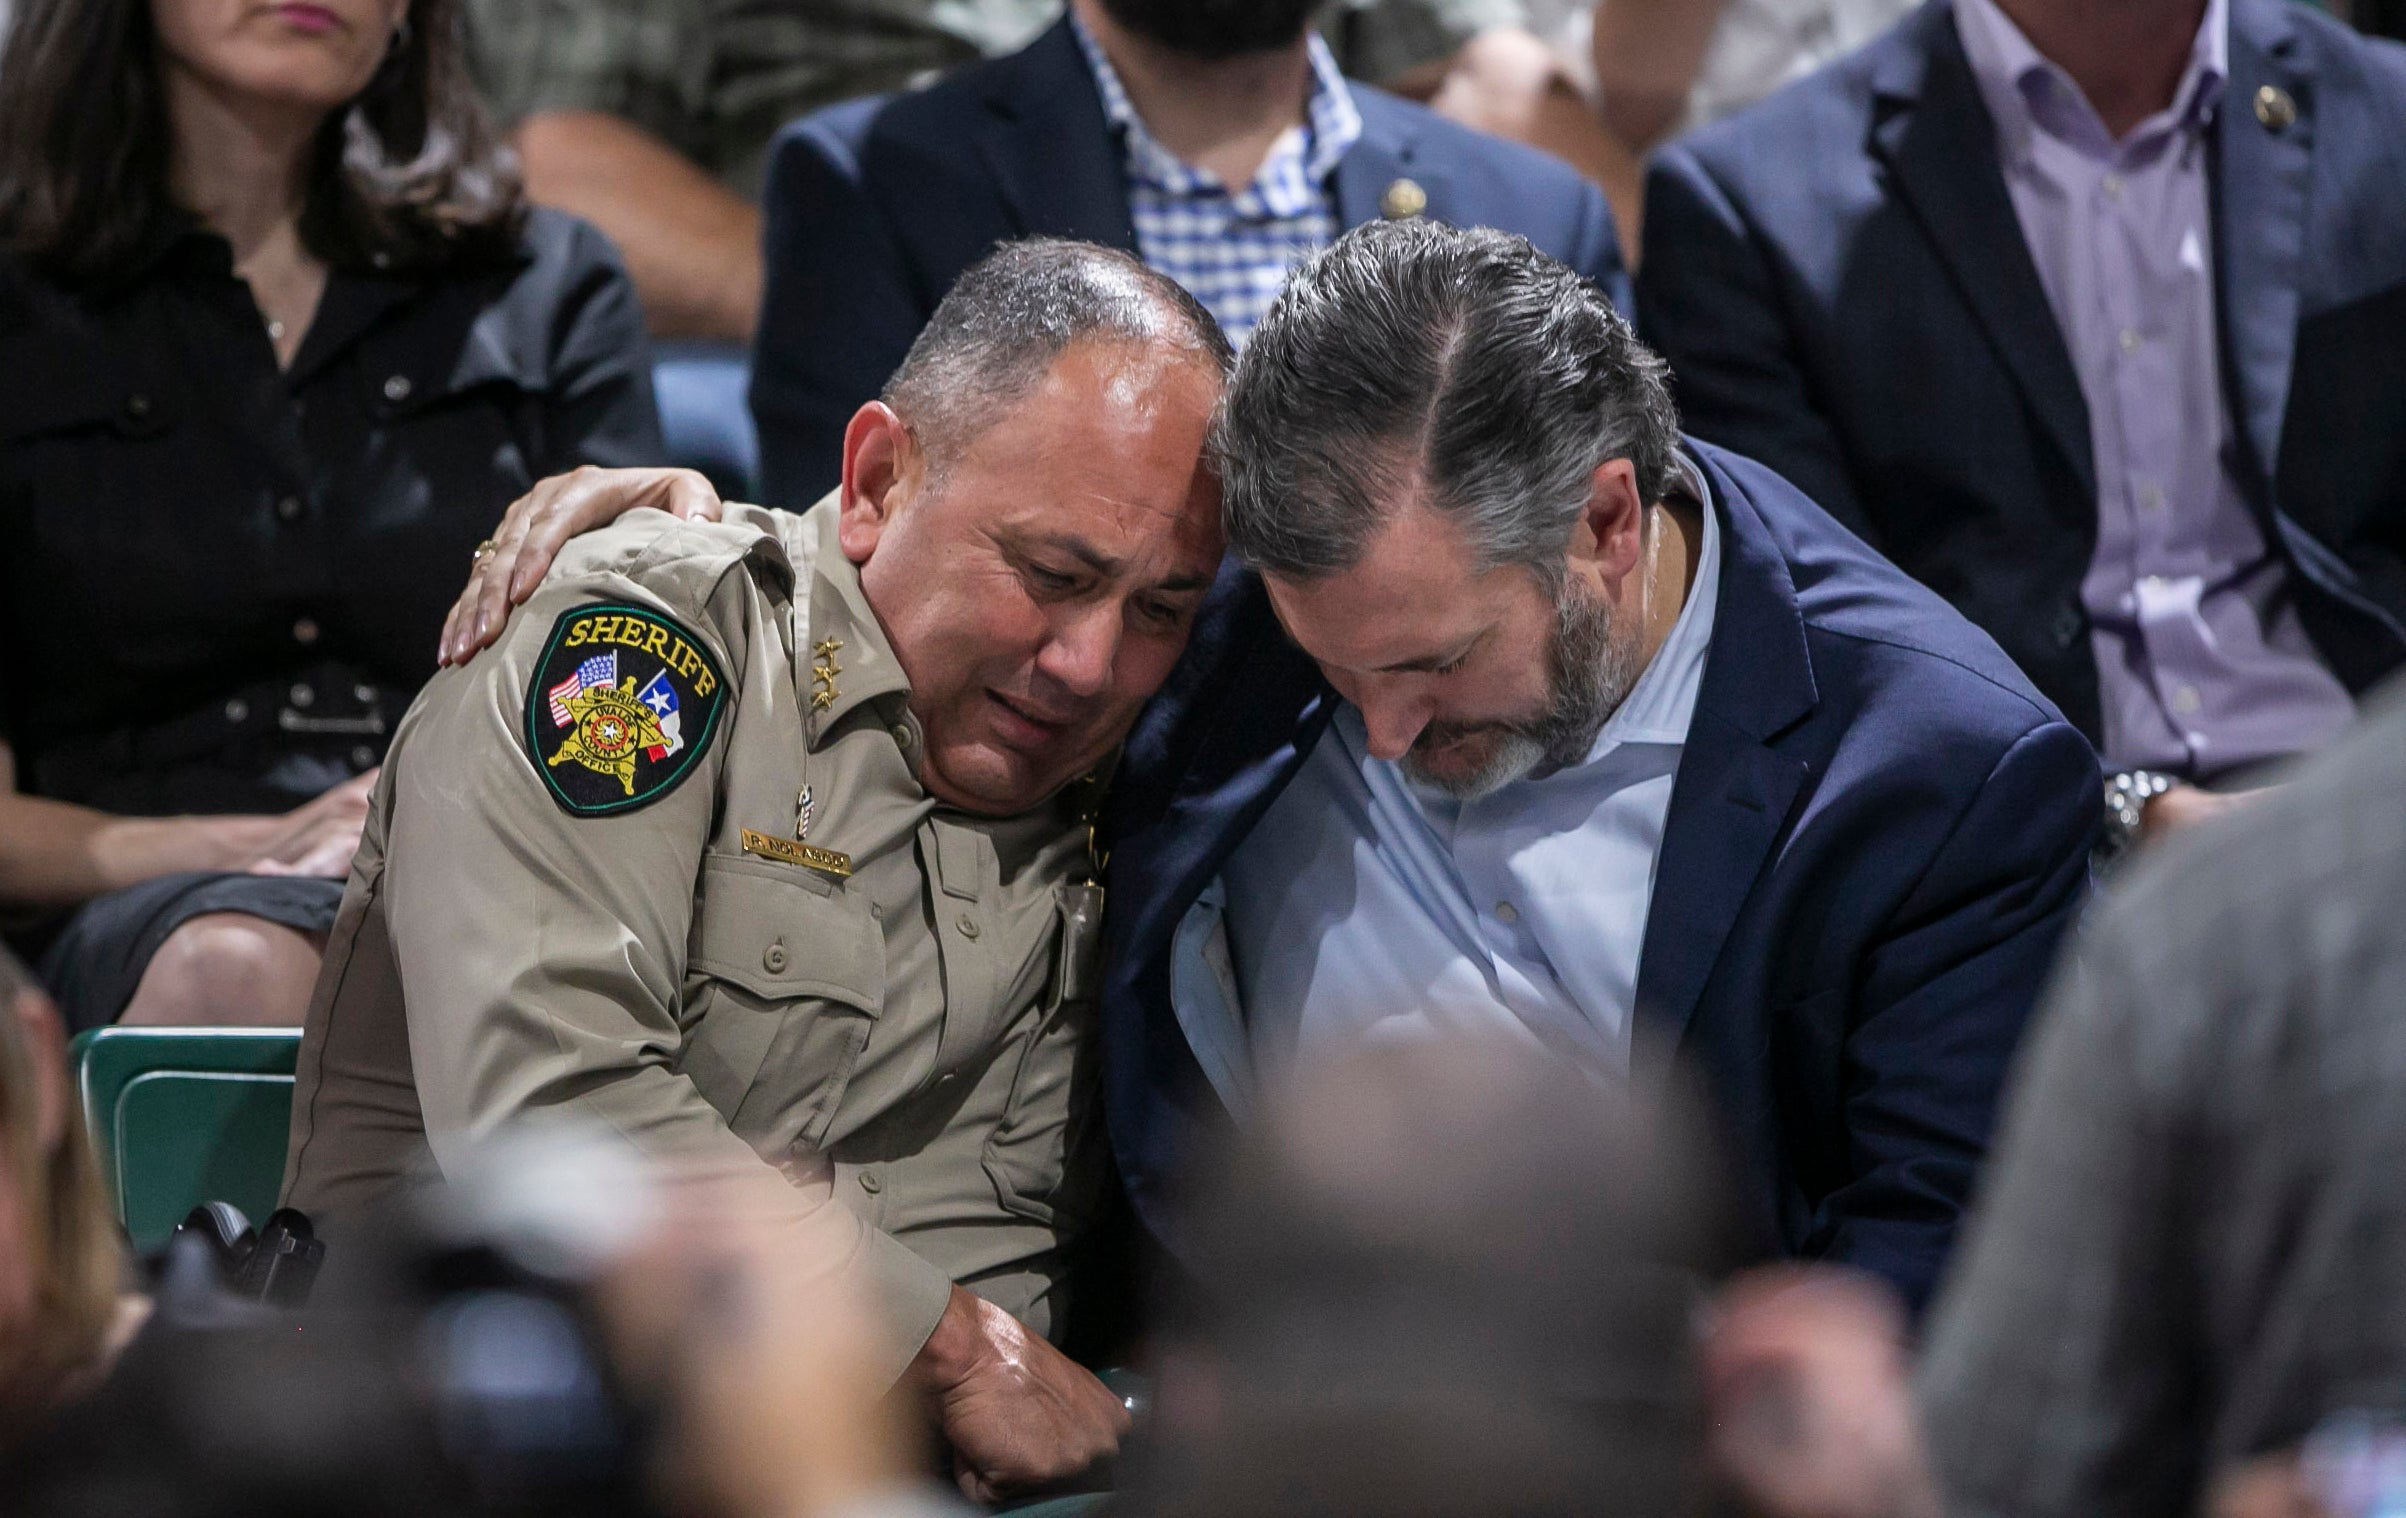 Uvalde County sheriff Ruben Nolasco, left, is comforted by US senator Ted Cruz during a vigil held in honor of those who died in the shooting